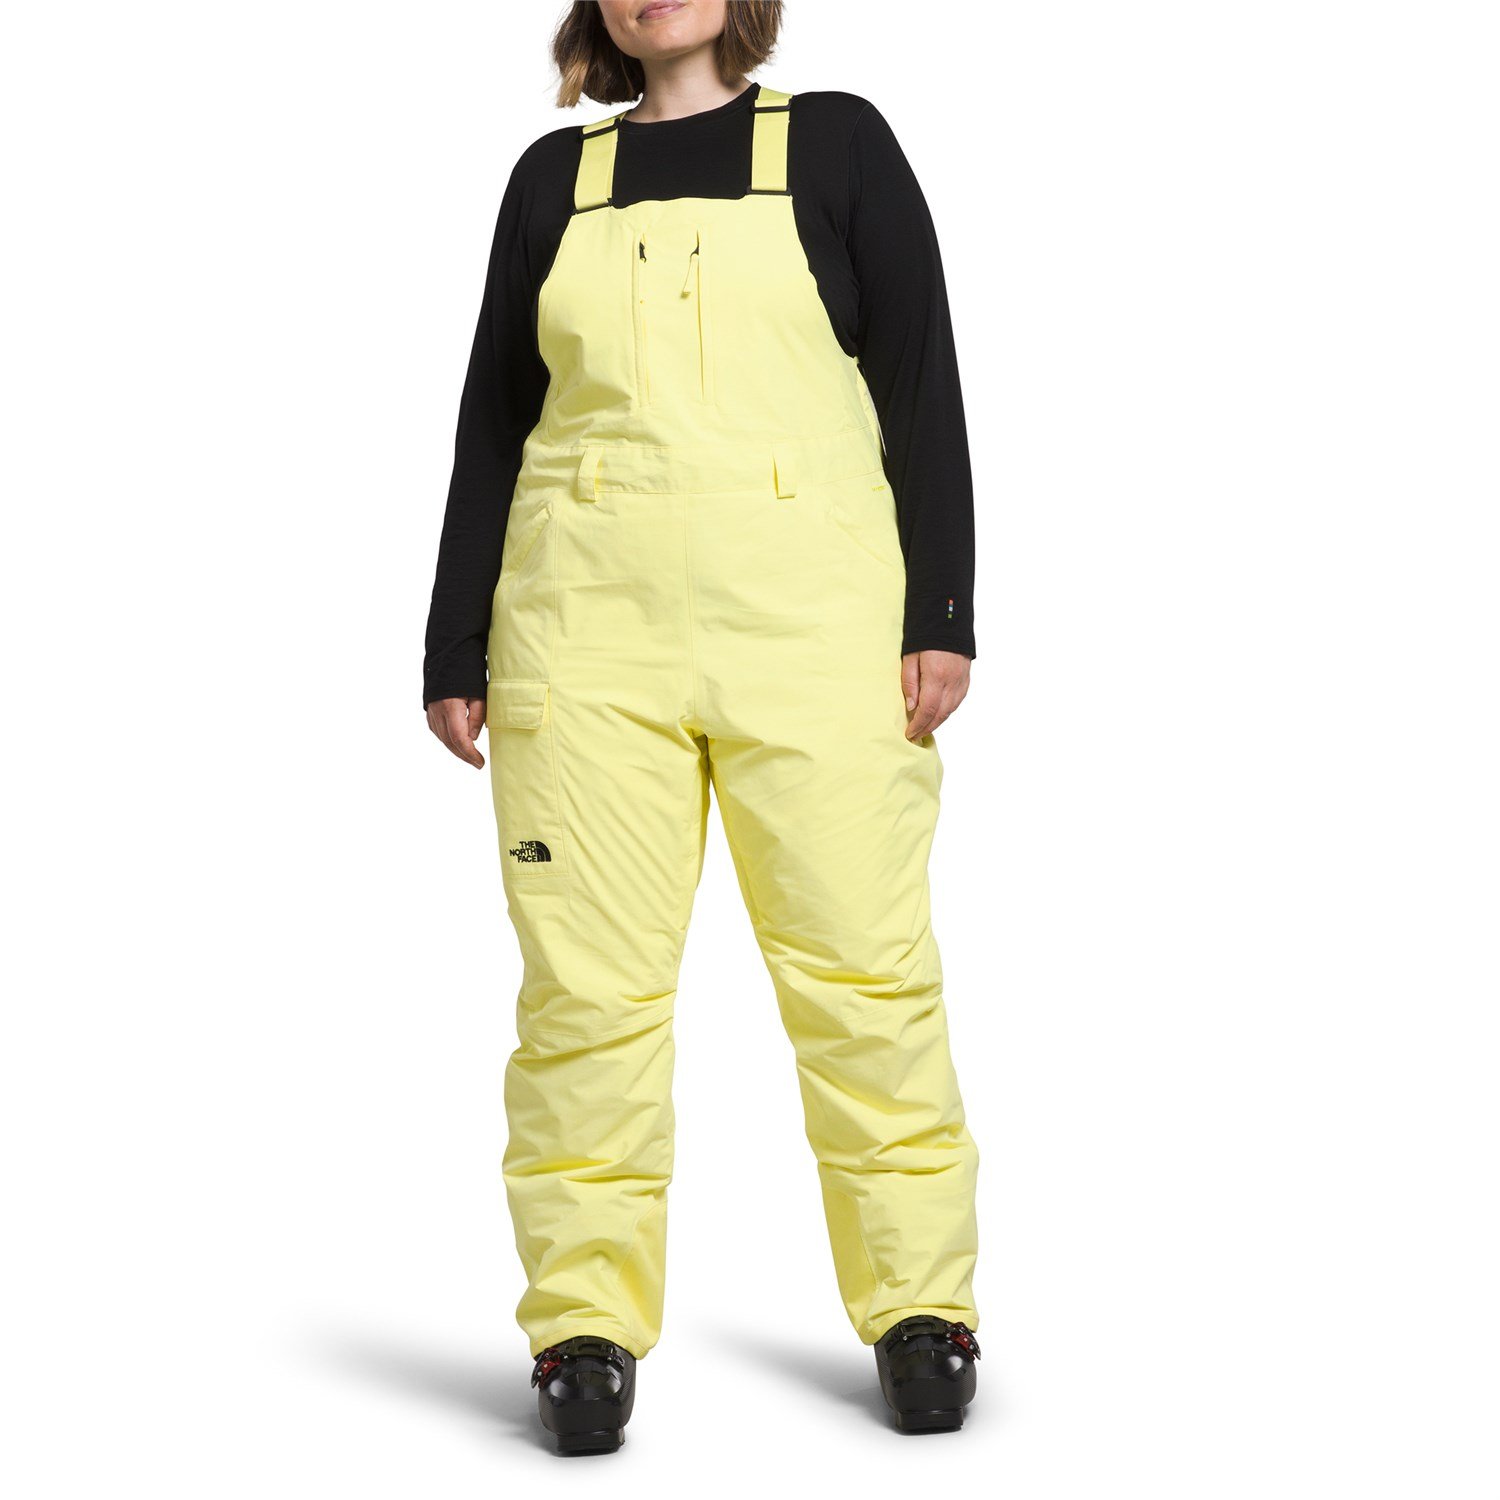 THE NORTH FACE Women's Freedom Insulated Bib (Standard and Plus Size)